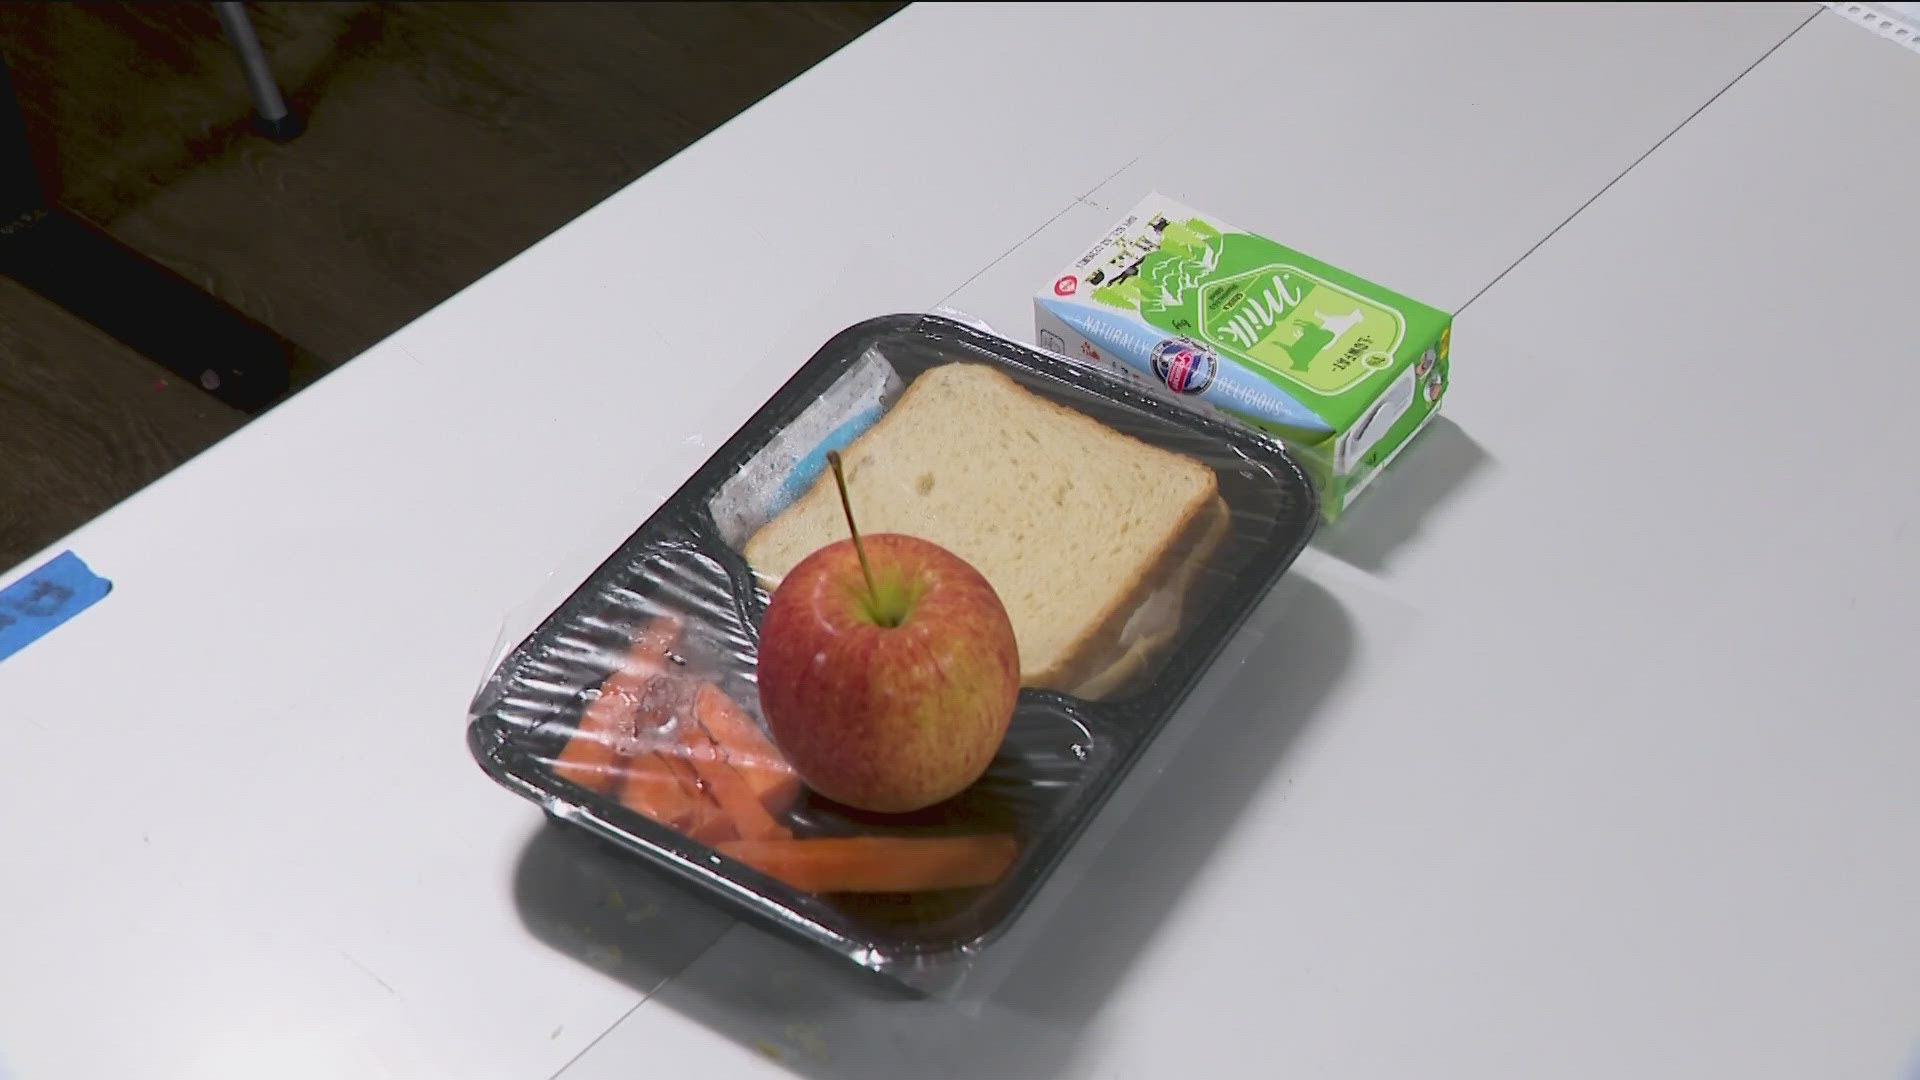 The Central Texas Food Bank says there is high demand for summer meals for kids.